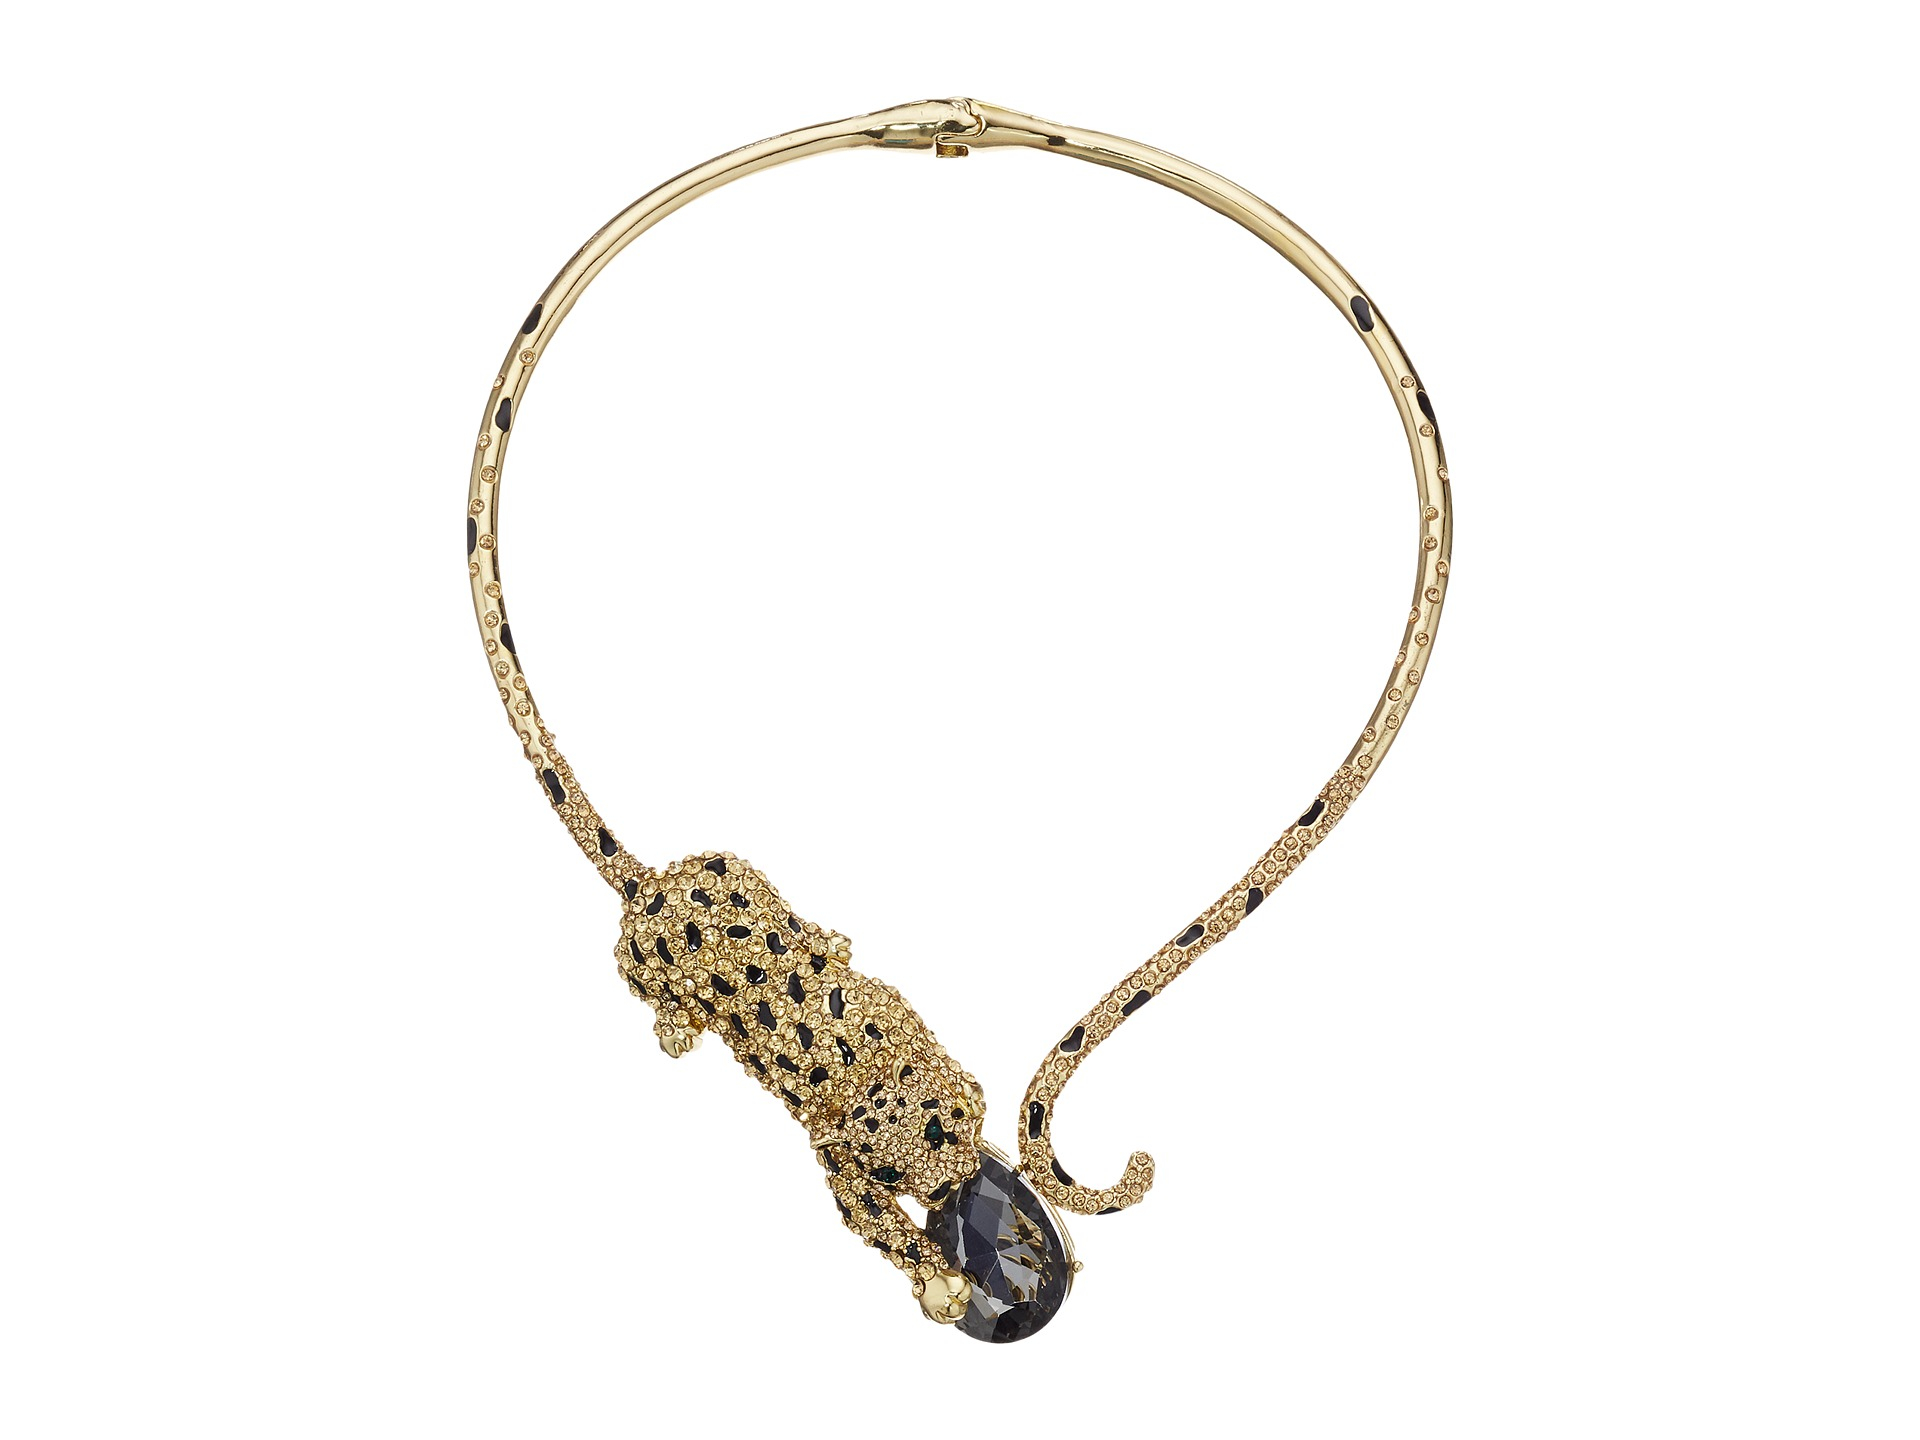 Betsey Johnson Critters Pave Leopard Collar Necklace in Metallic 